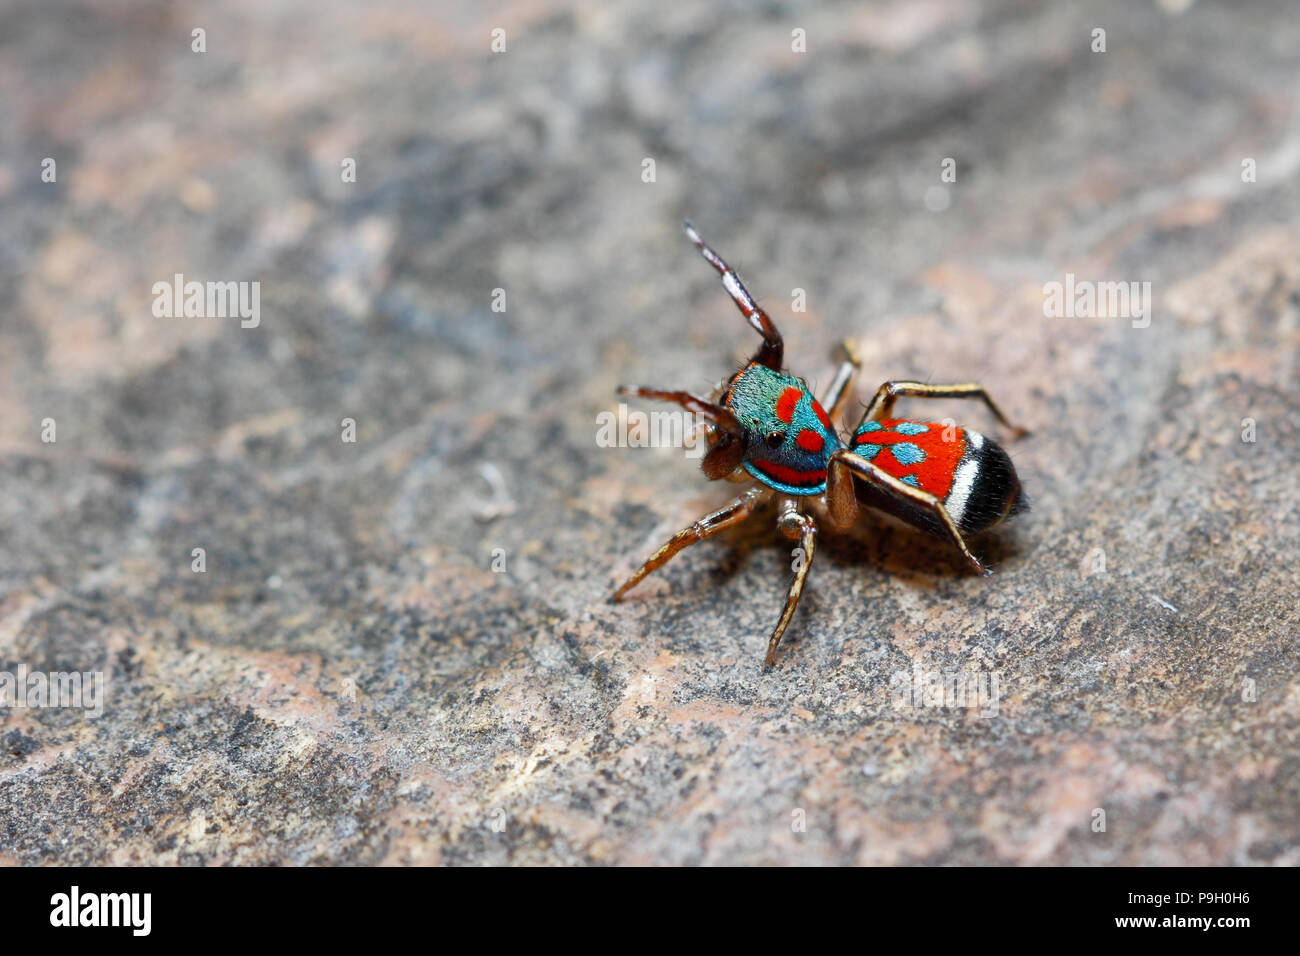 Colorful jumping spider / Metallic jumper spider (Siler semiglaucus)(female) on rock background (taken from Thailand, Southeast Asia) Stock Photo